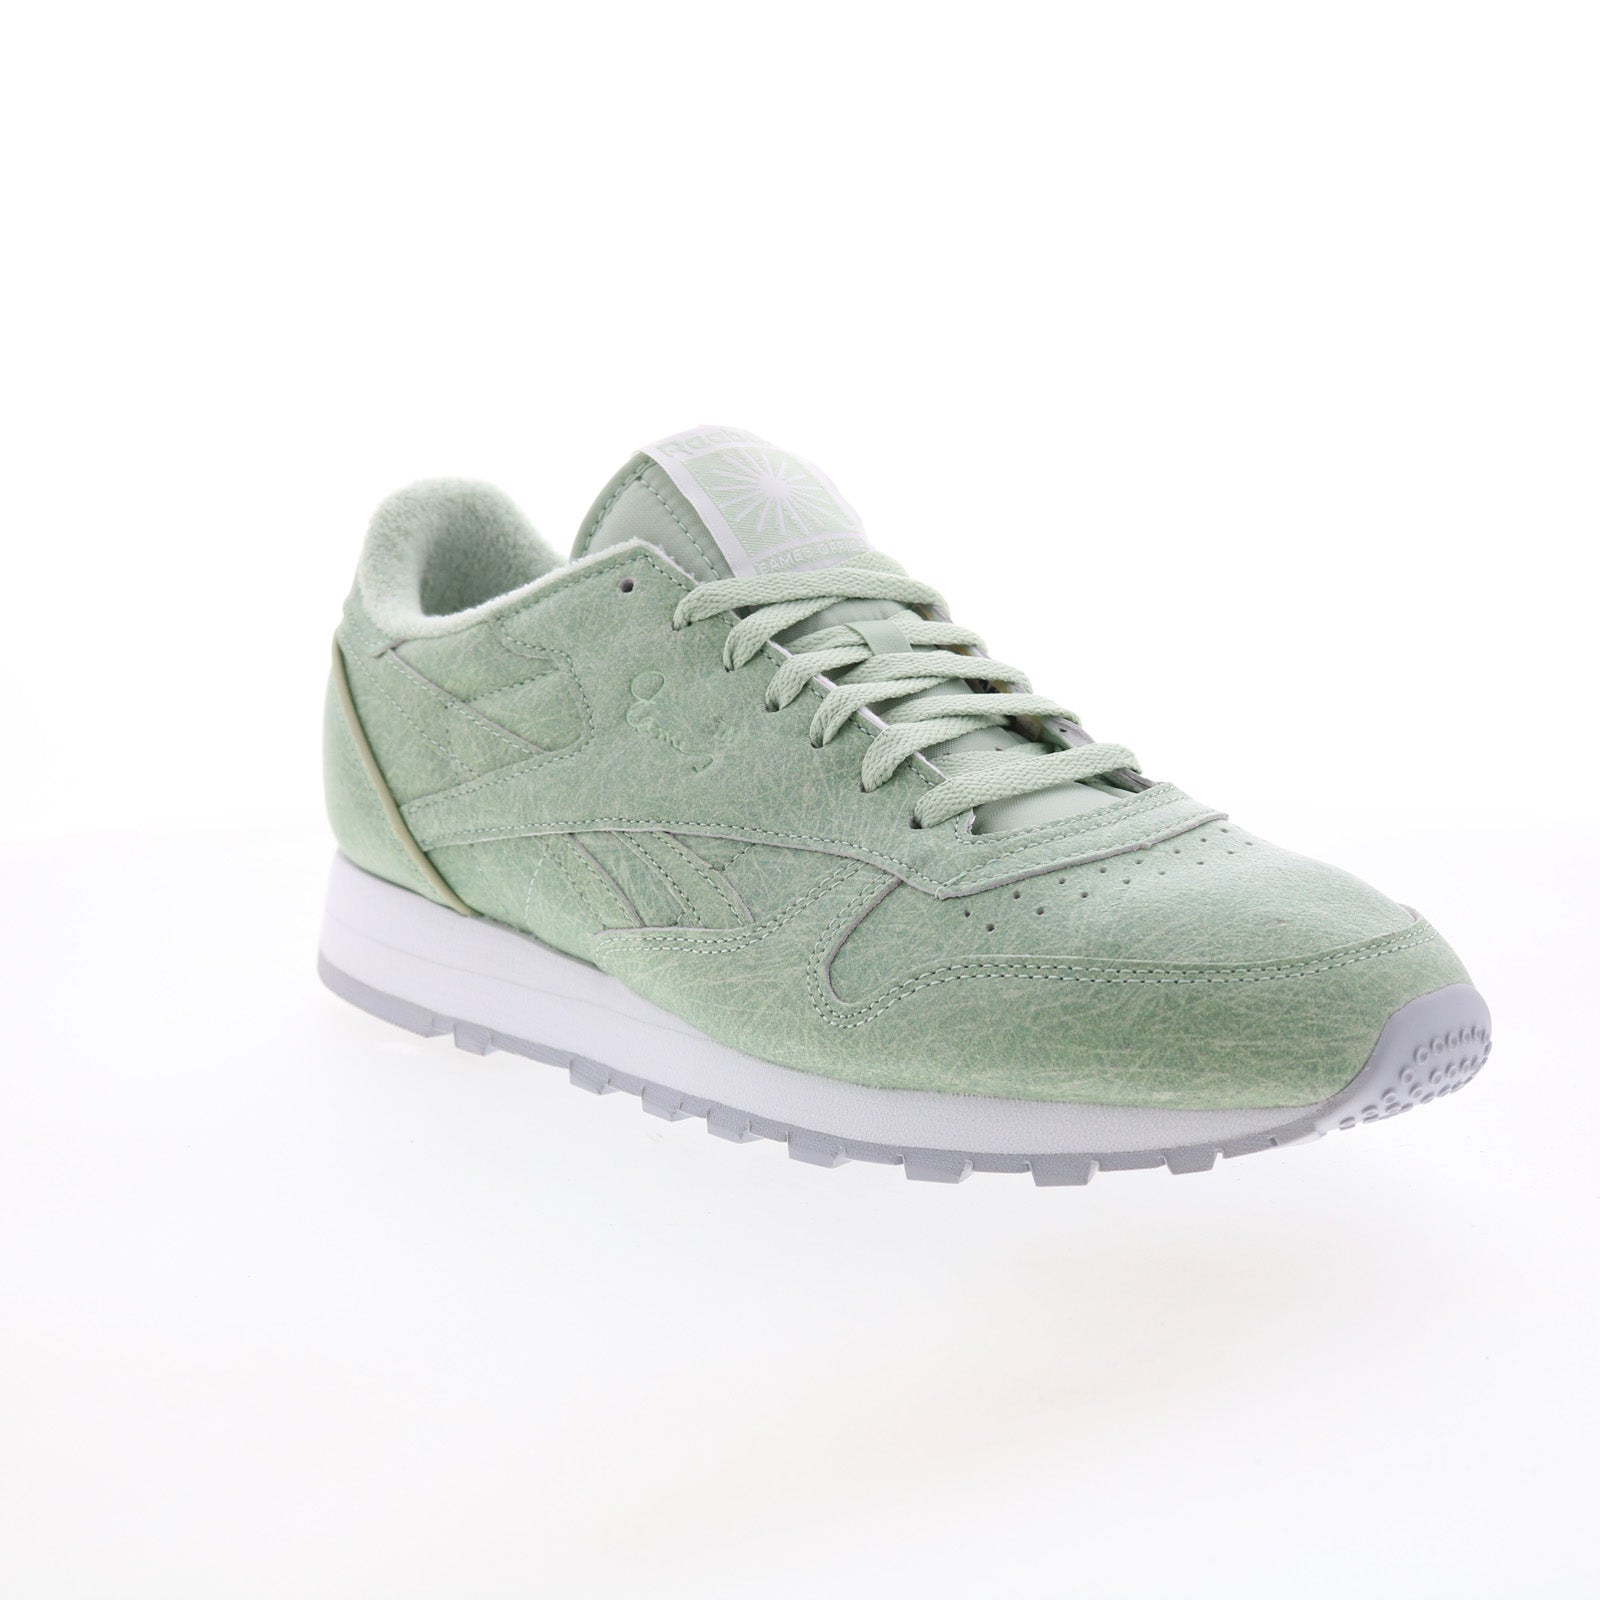 Reebok Eames Classic FZ5858 Mens Green Leather Lifestyle Sneakers Shoes